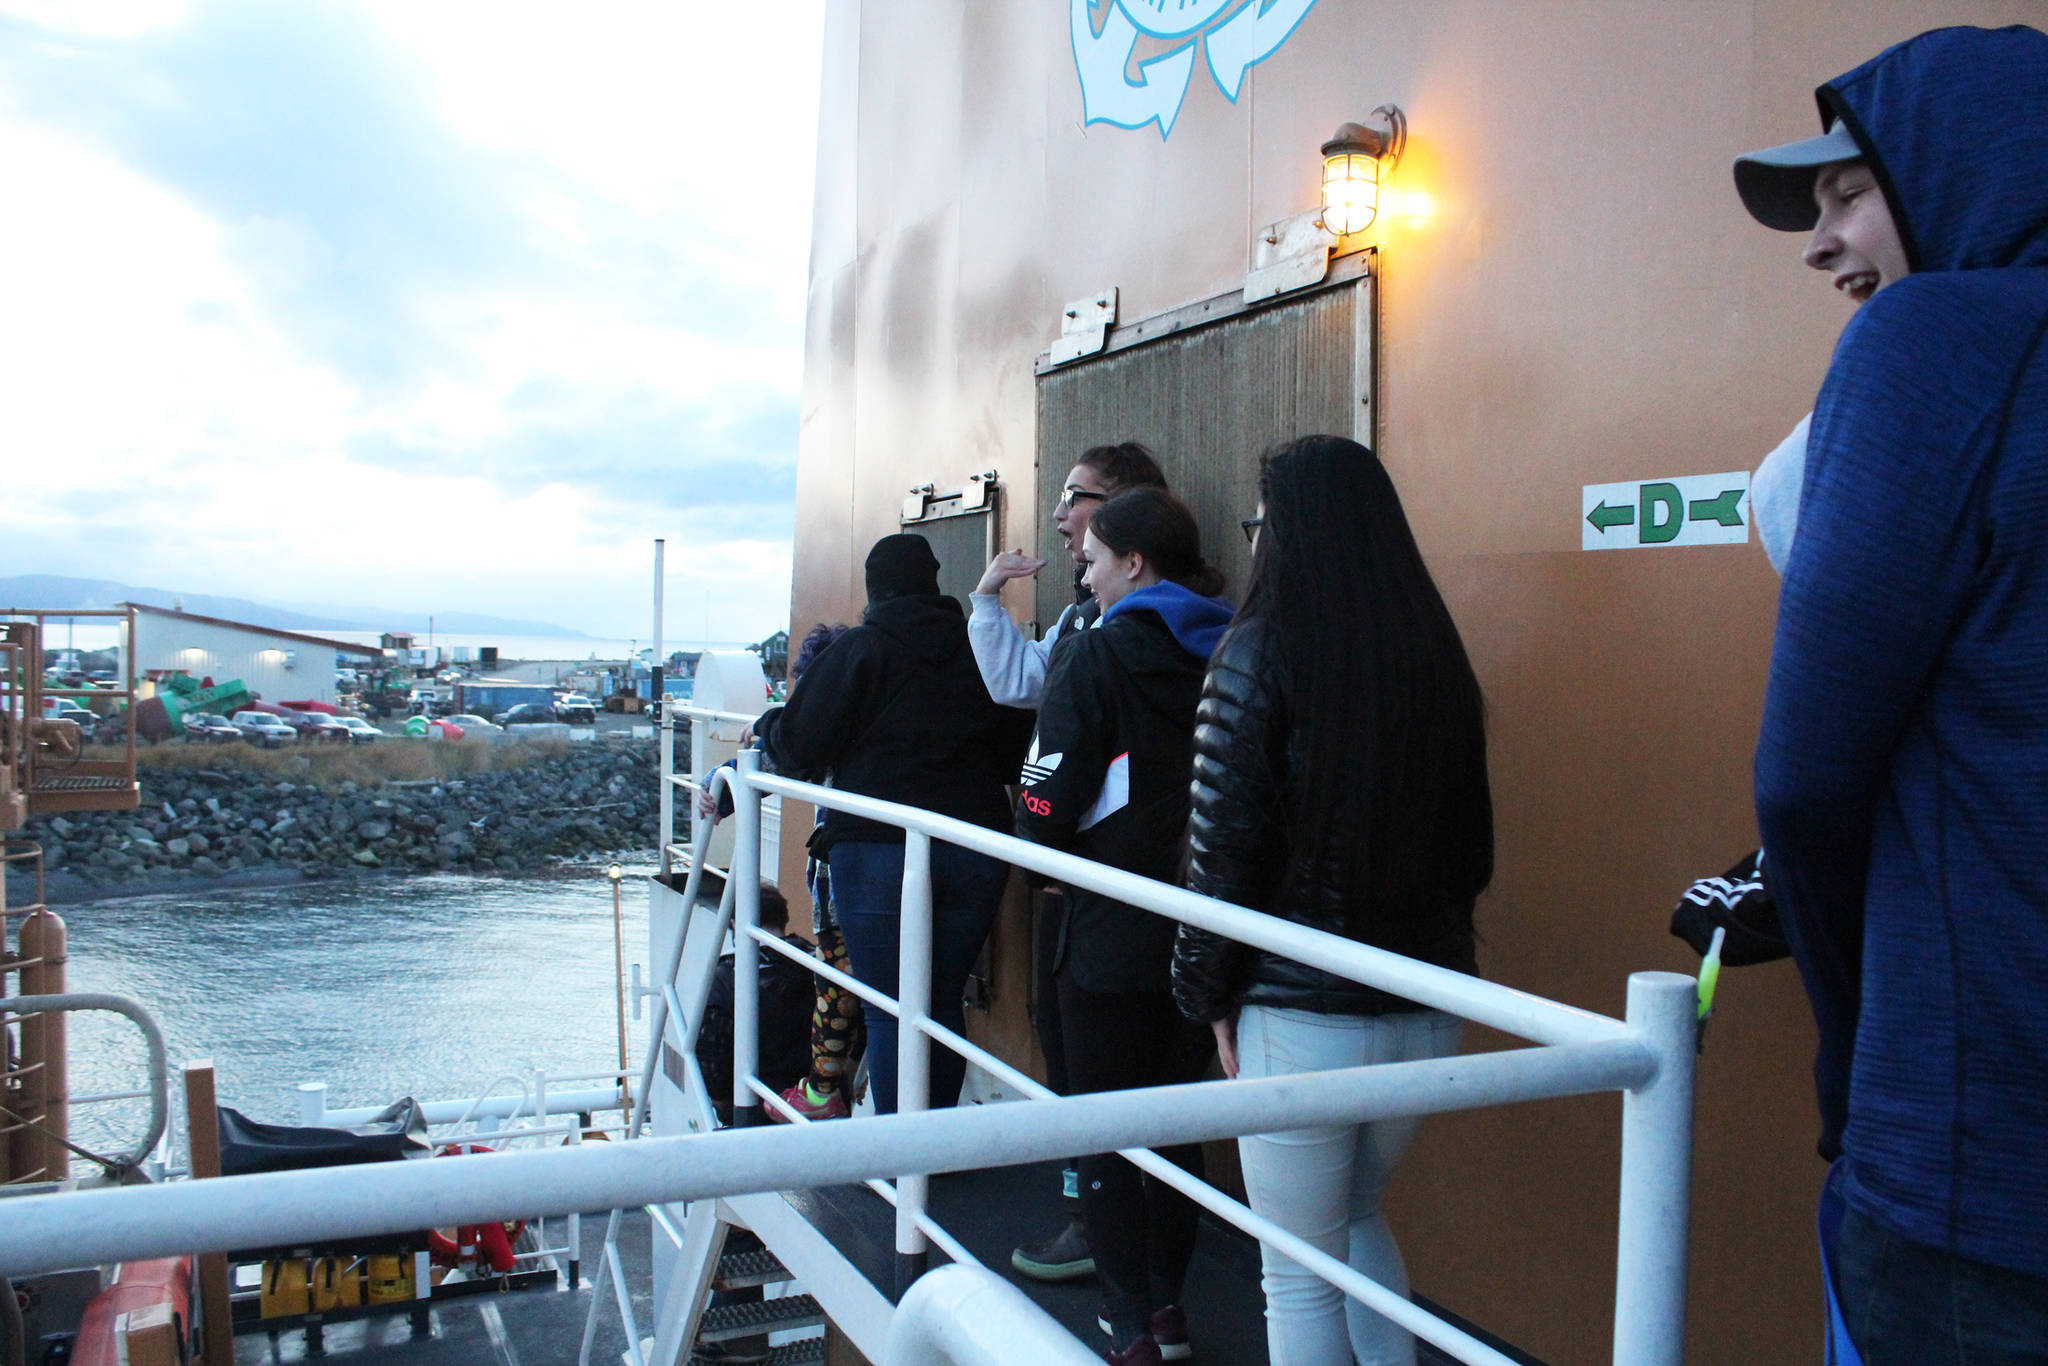 A group of young people make their way across the U.S. Coast Guard Cutter Hickory at the start of their spooky tour in this year’s Haunted Hickory event Thursday, Oct. 26, 2017 in Homer, Alaska. They and hundreds of others donated two nonperishable items to get scared by the ship’s crew members and their families during the annual event. (Photo by Megan Pacer/Homer News)